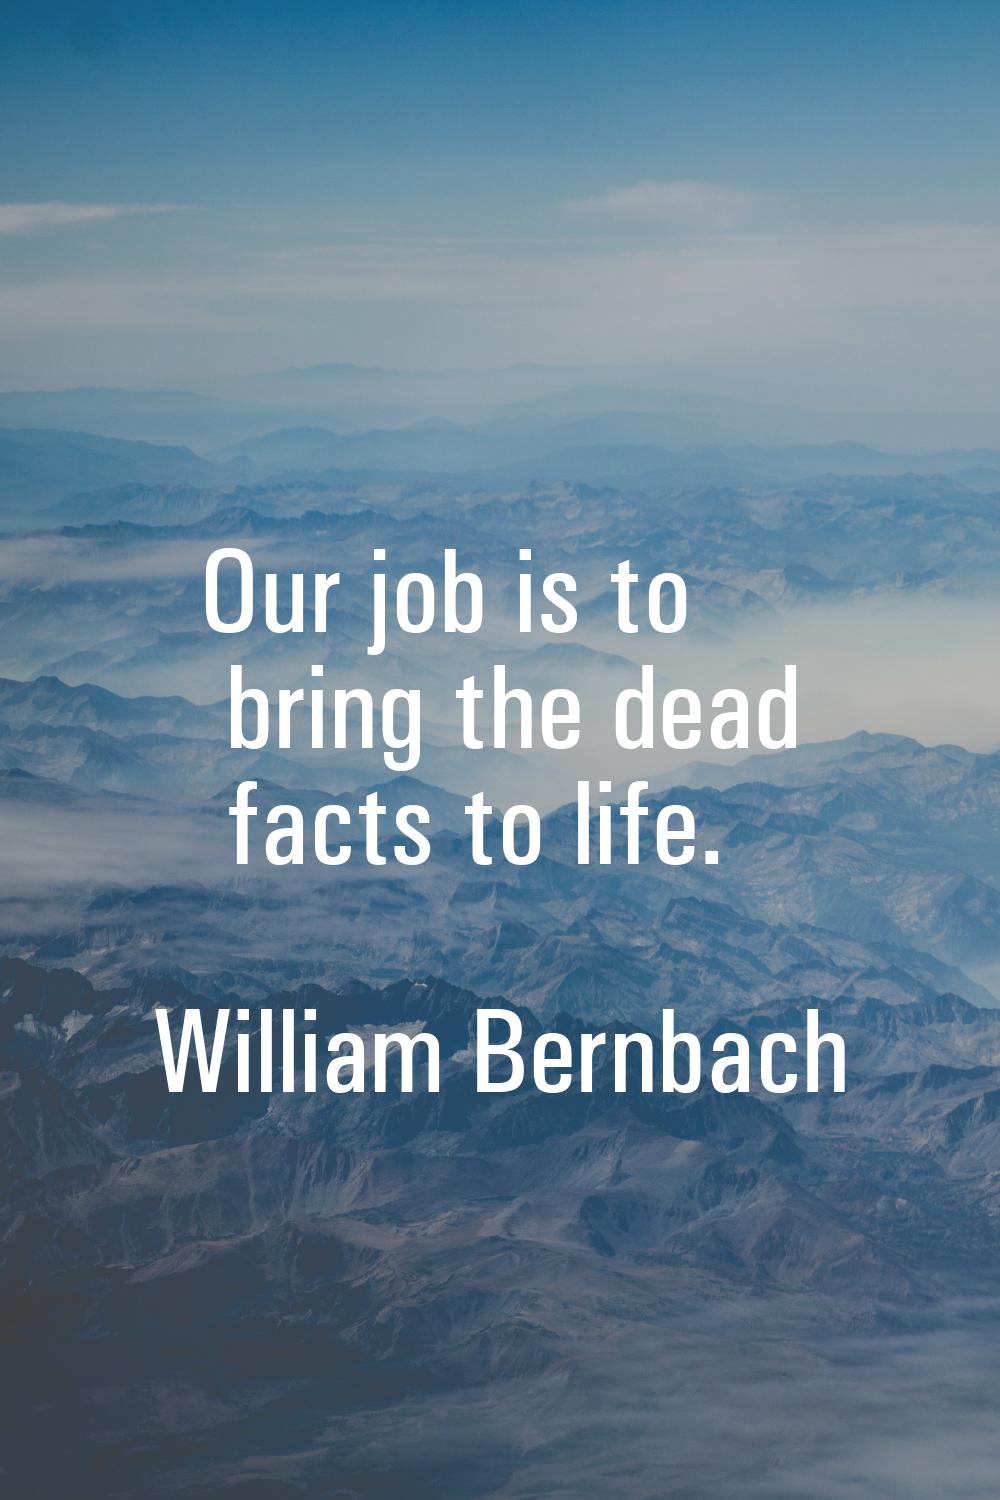 Our job is to bring the dead facts to life.